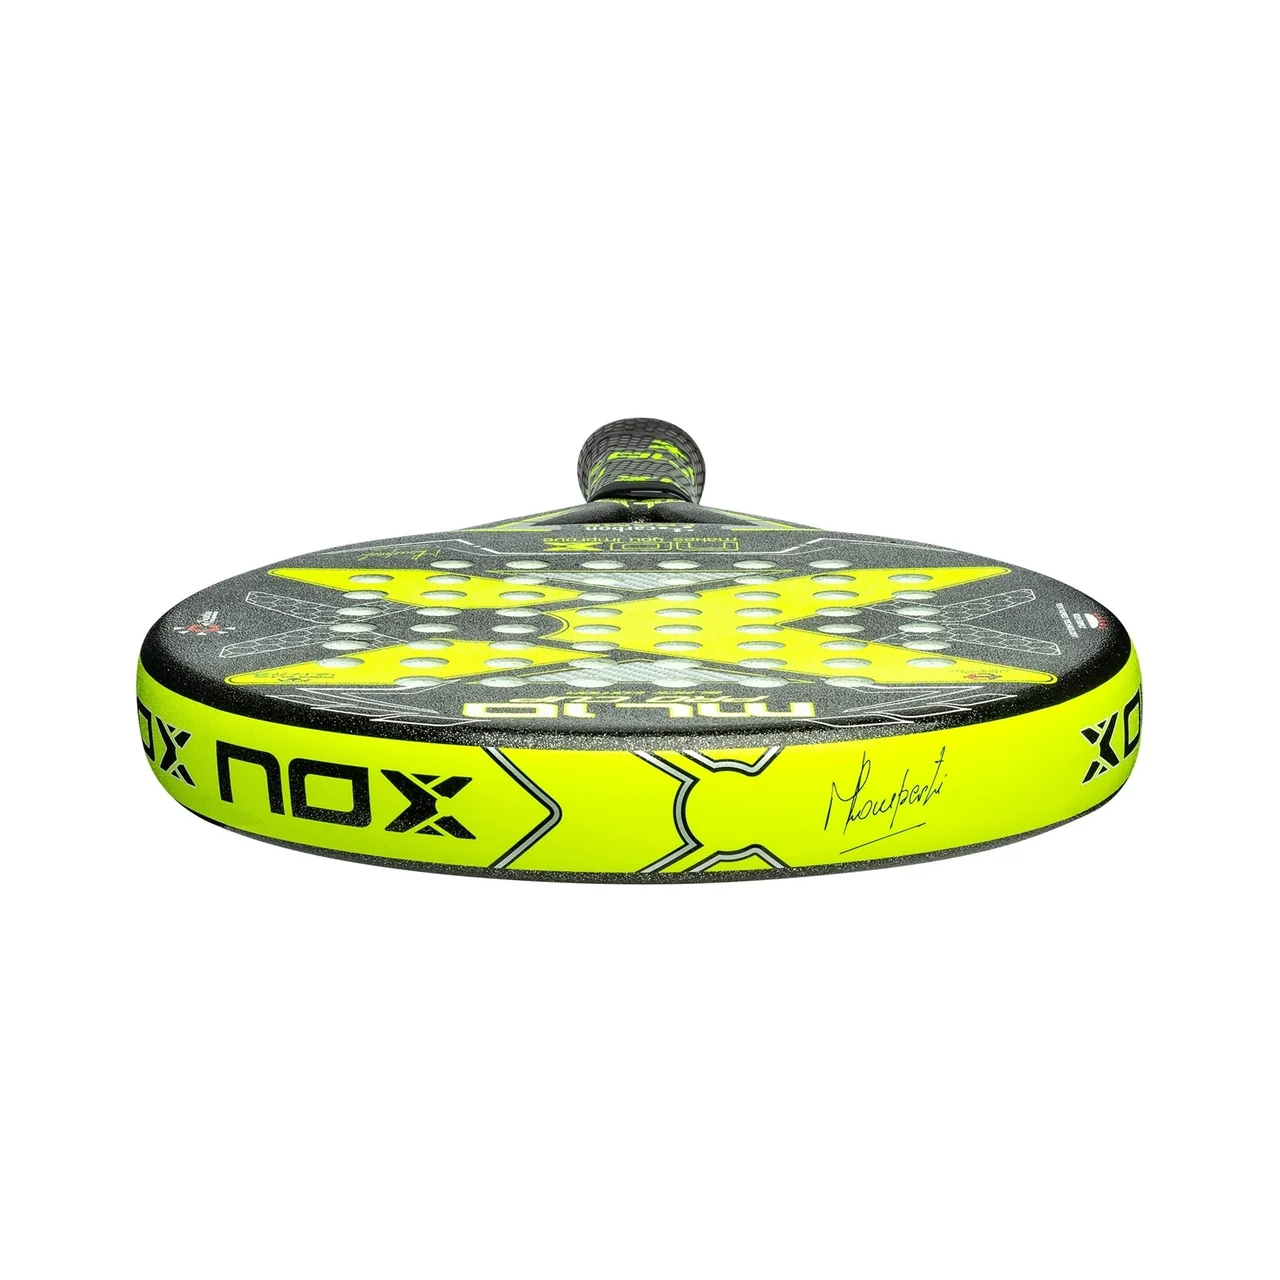 Nox ML 10 Pro Cup Arena Rough Surface 2021